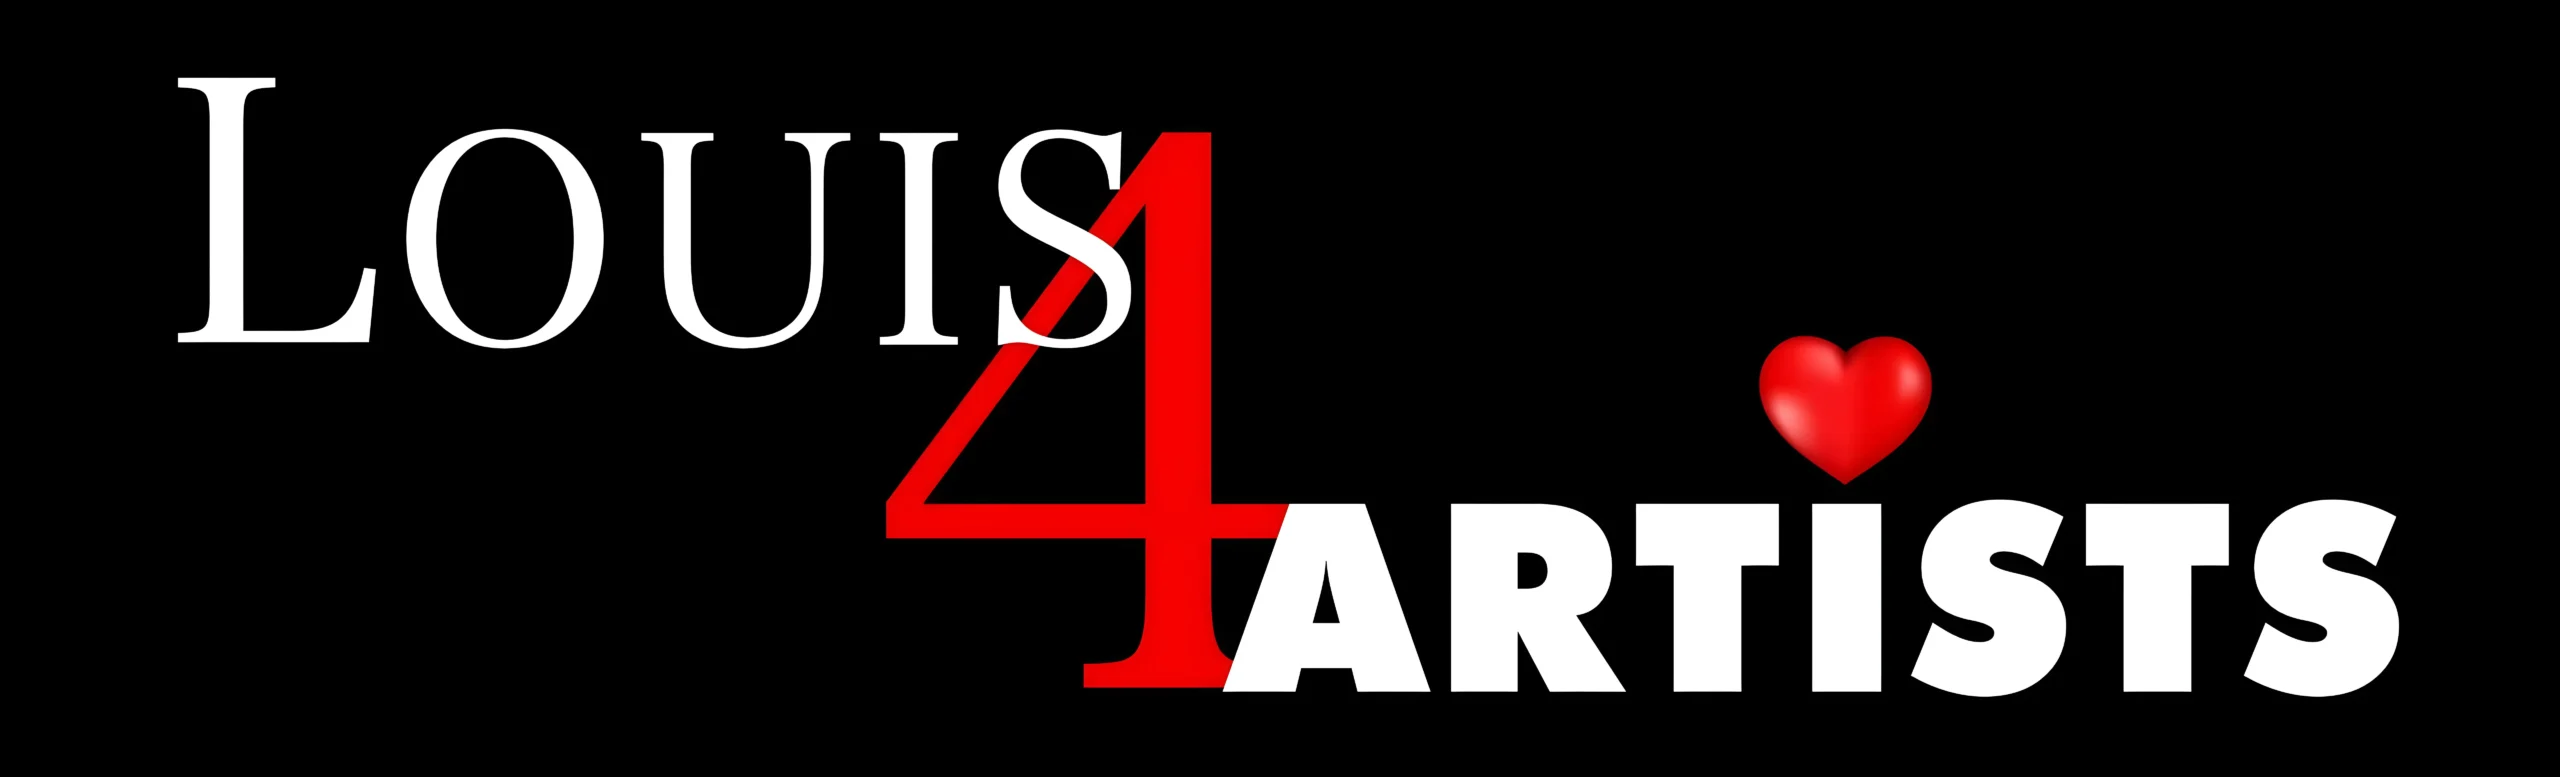 logo louis4artists out scaled